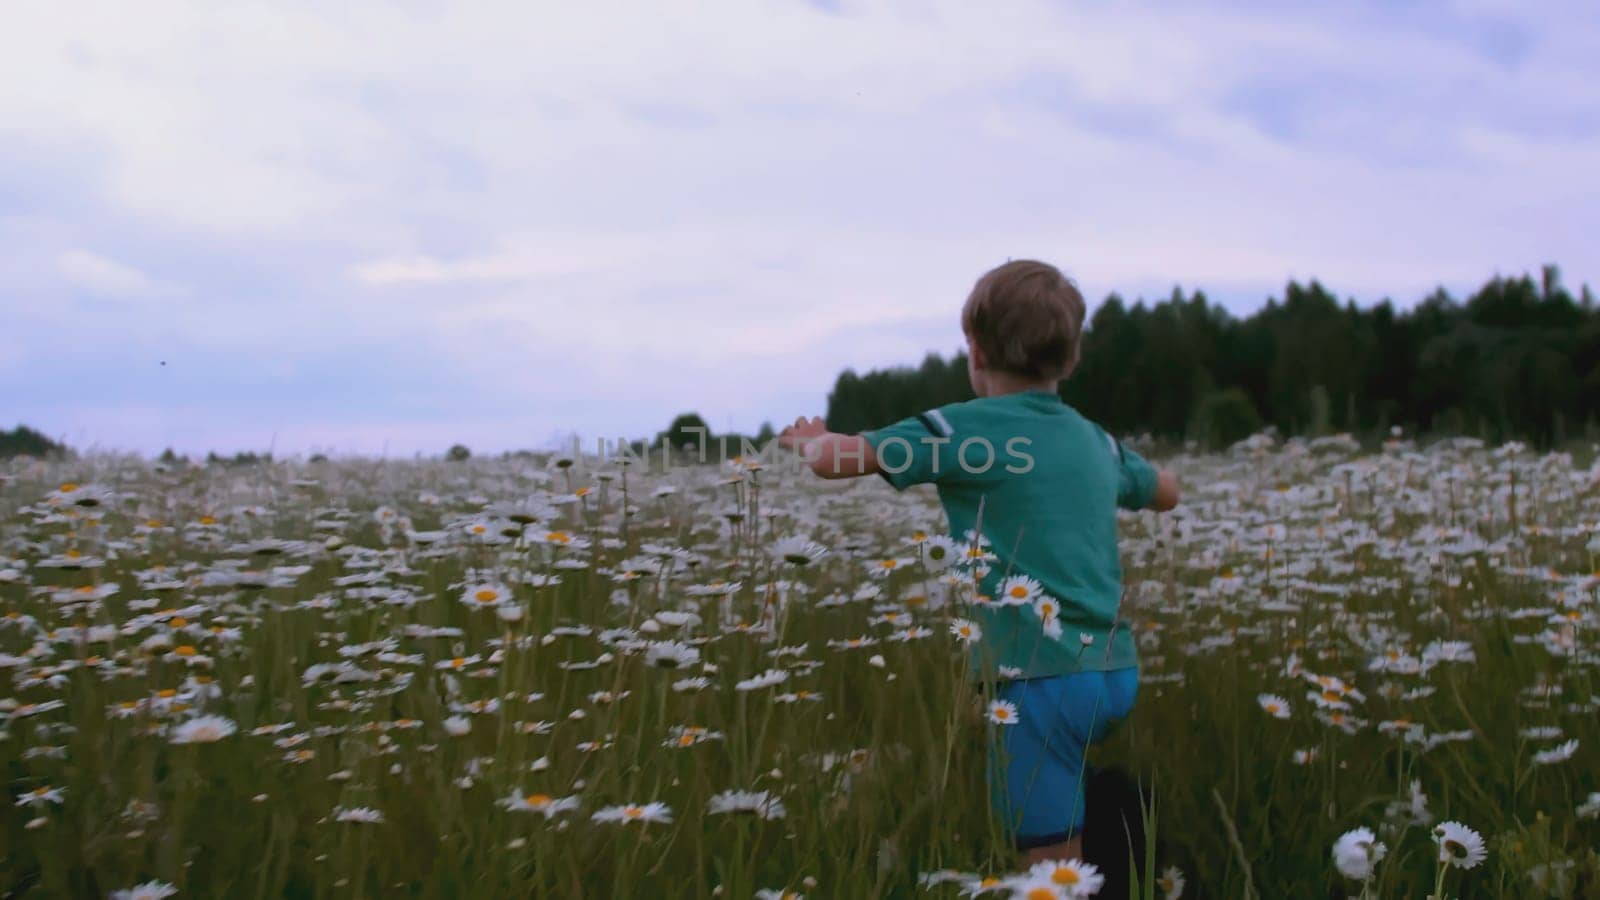 The boy runs through the meadow with flowers. CREATIVE. Rear view of a child running through a field of daisies. A child in blue clothes runs through the tall grass with daisies by Mediawhalestock